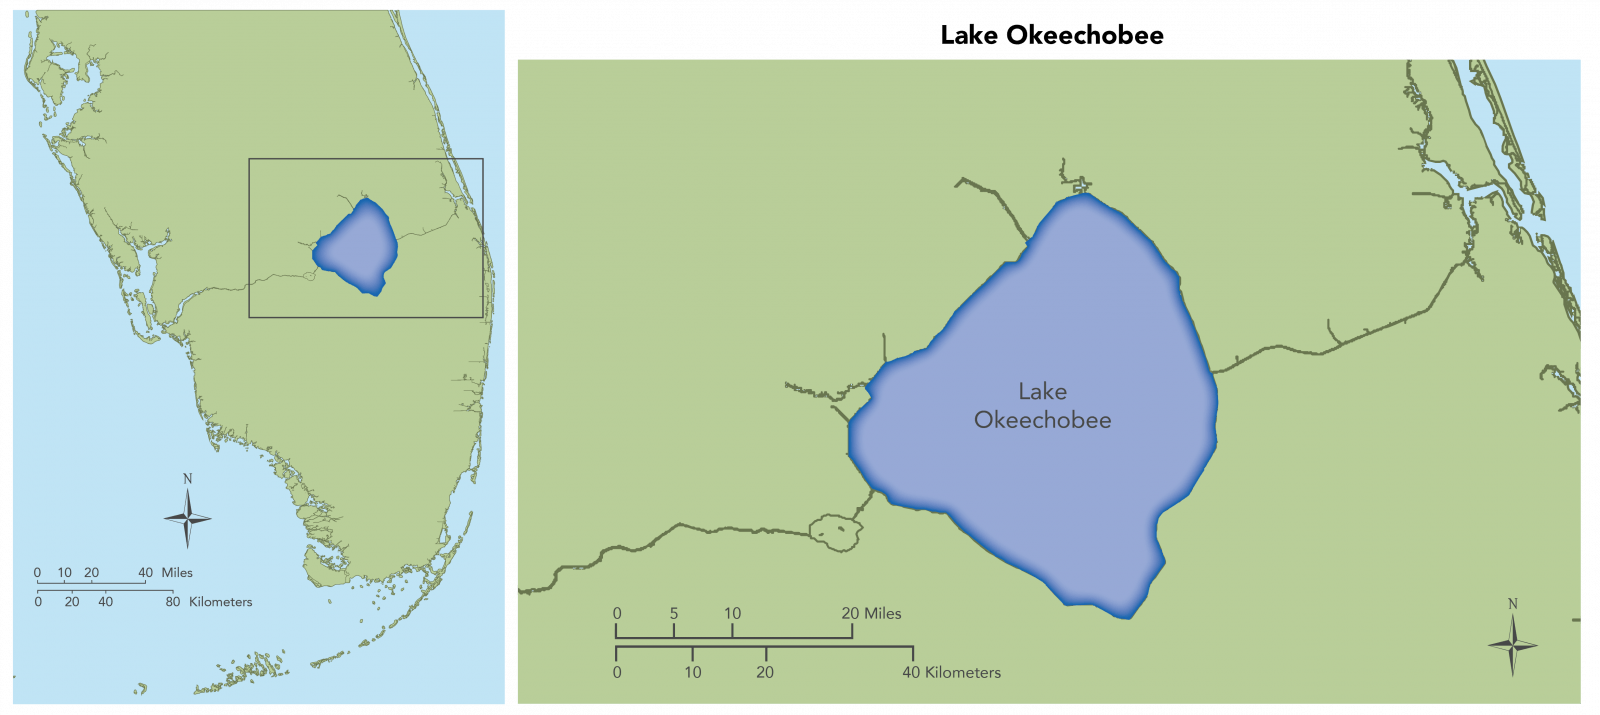  Map showing long view and detail view of Lake Okeechobee. This includes the Caloosahatchee River Estuary, the St. Lucie Estuary and Southern Indian River Lagoon, and the Loxahatchee River Estuary